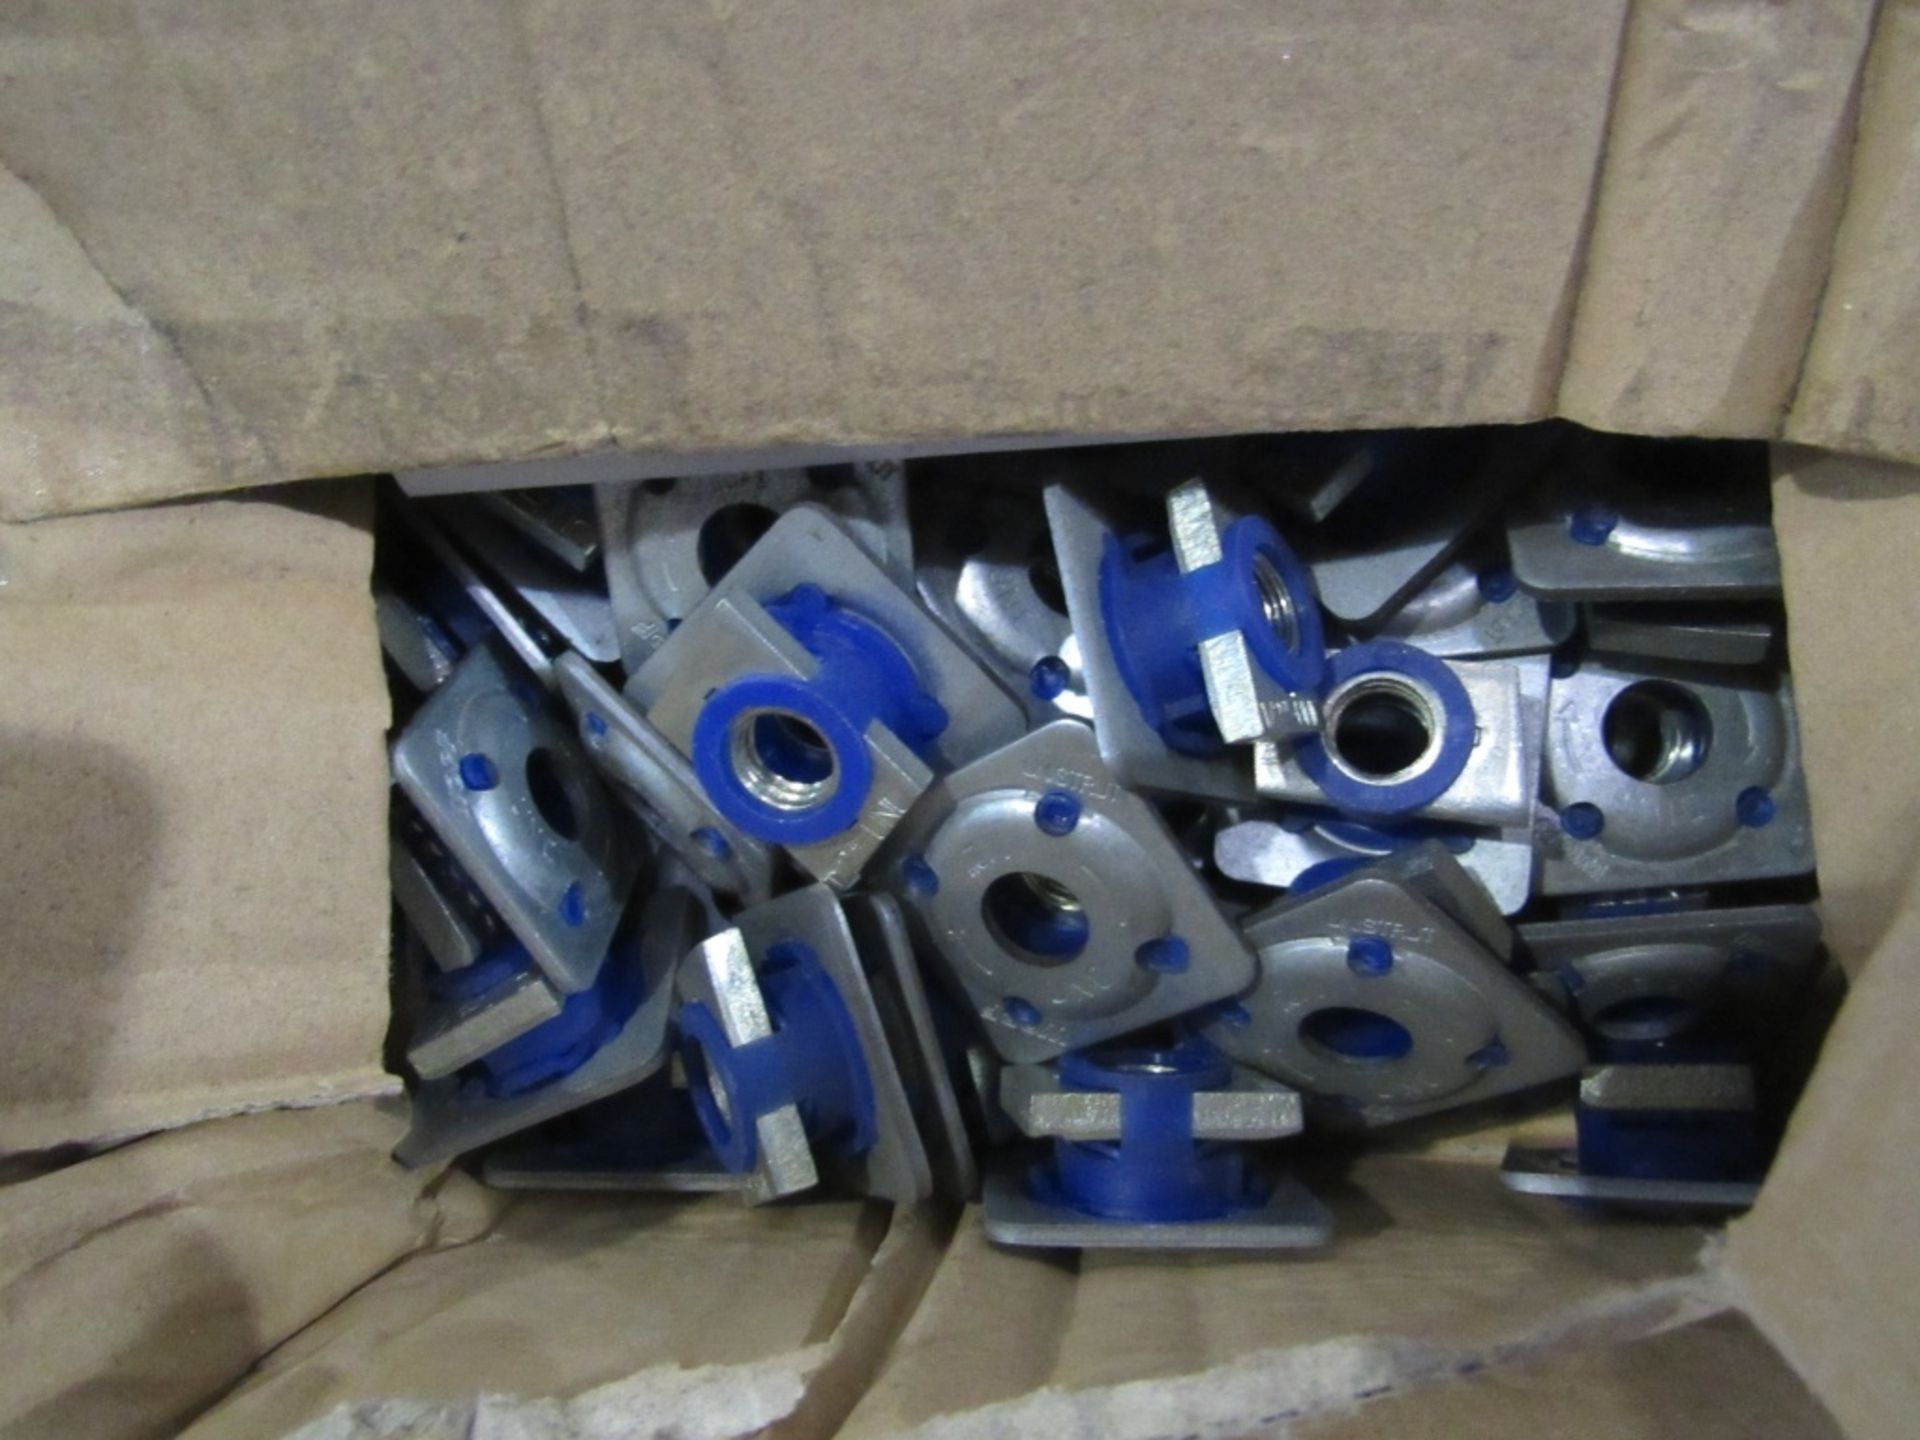 (approx qty - 2,000) Kwik Washers- ***Located in Cleveland, TN*** MFR - Unistrut Kwik Washer 1/2" - Image 3 of 9